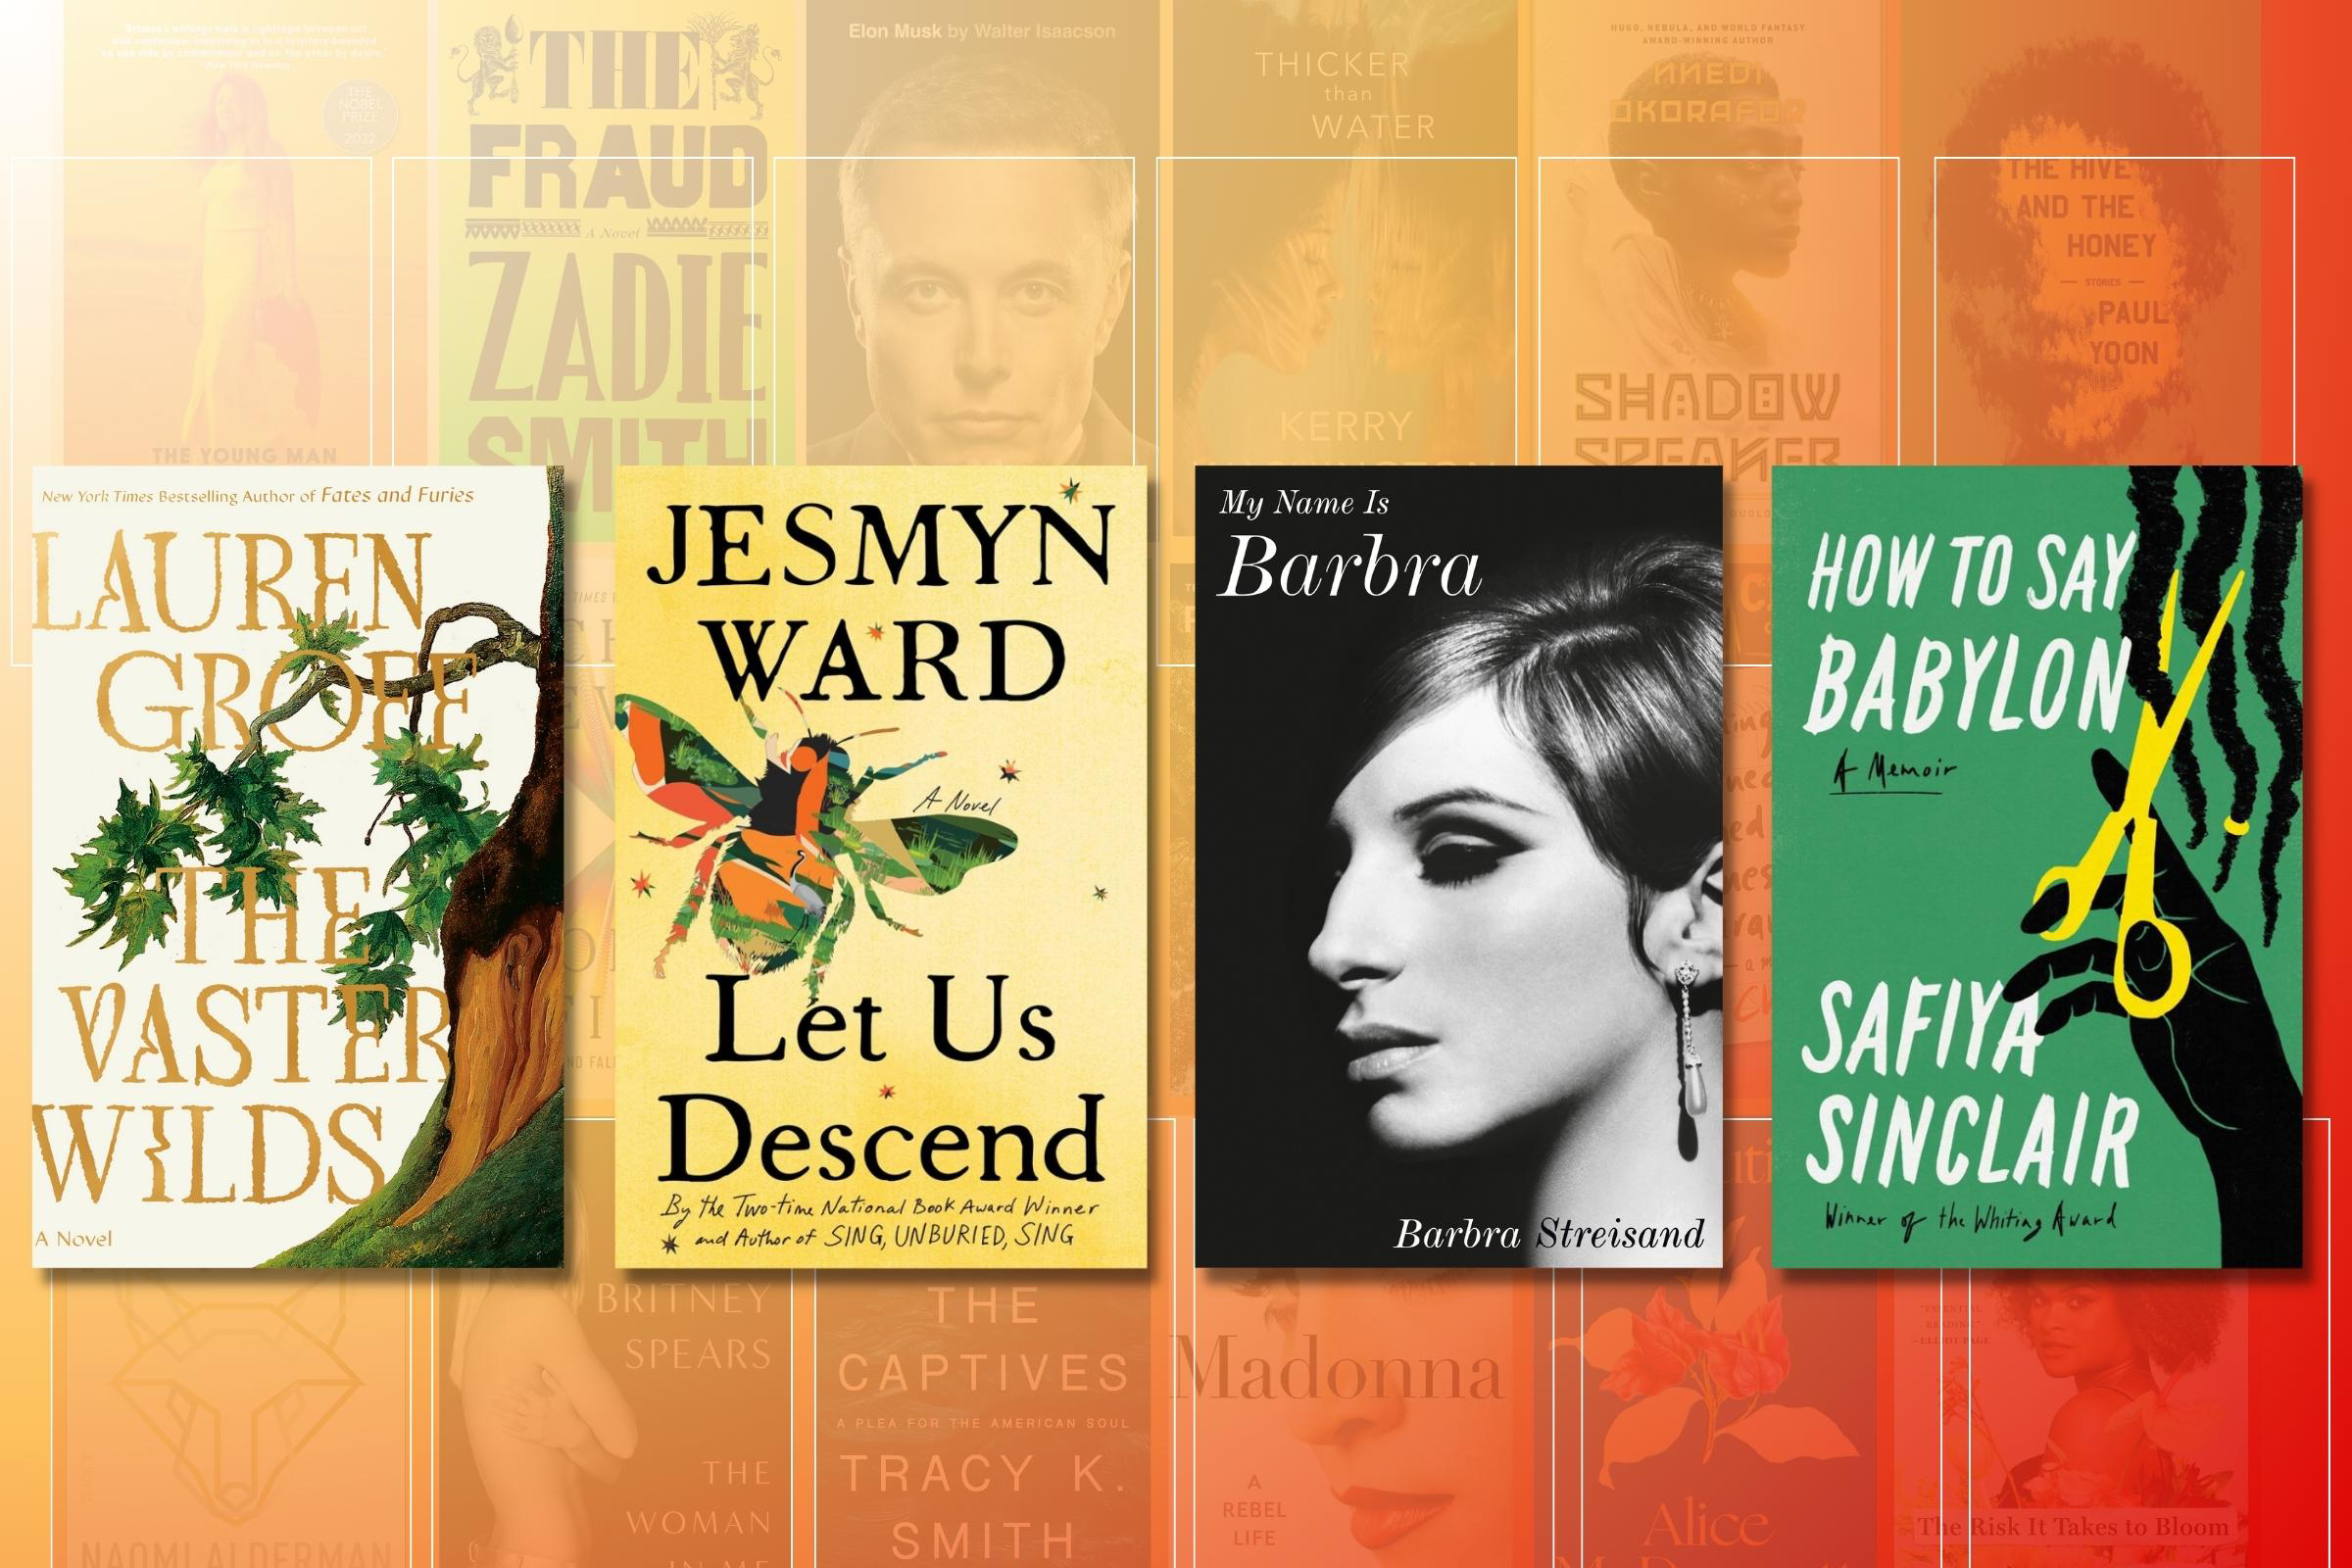 From Jesmyn Ward's 'Let Us Descend' to Barbra Streisand's long-awaited memoir, these are the best new books to read this fall.